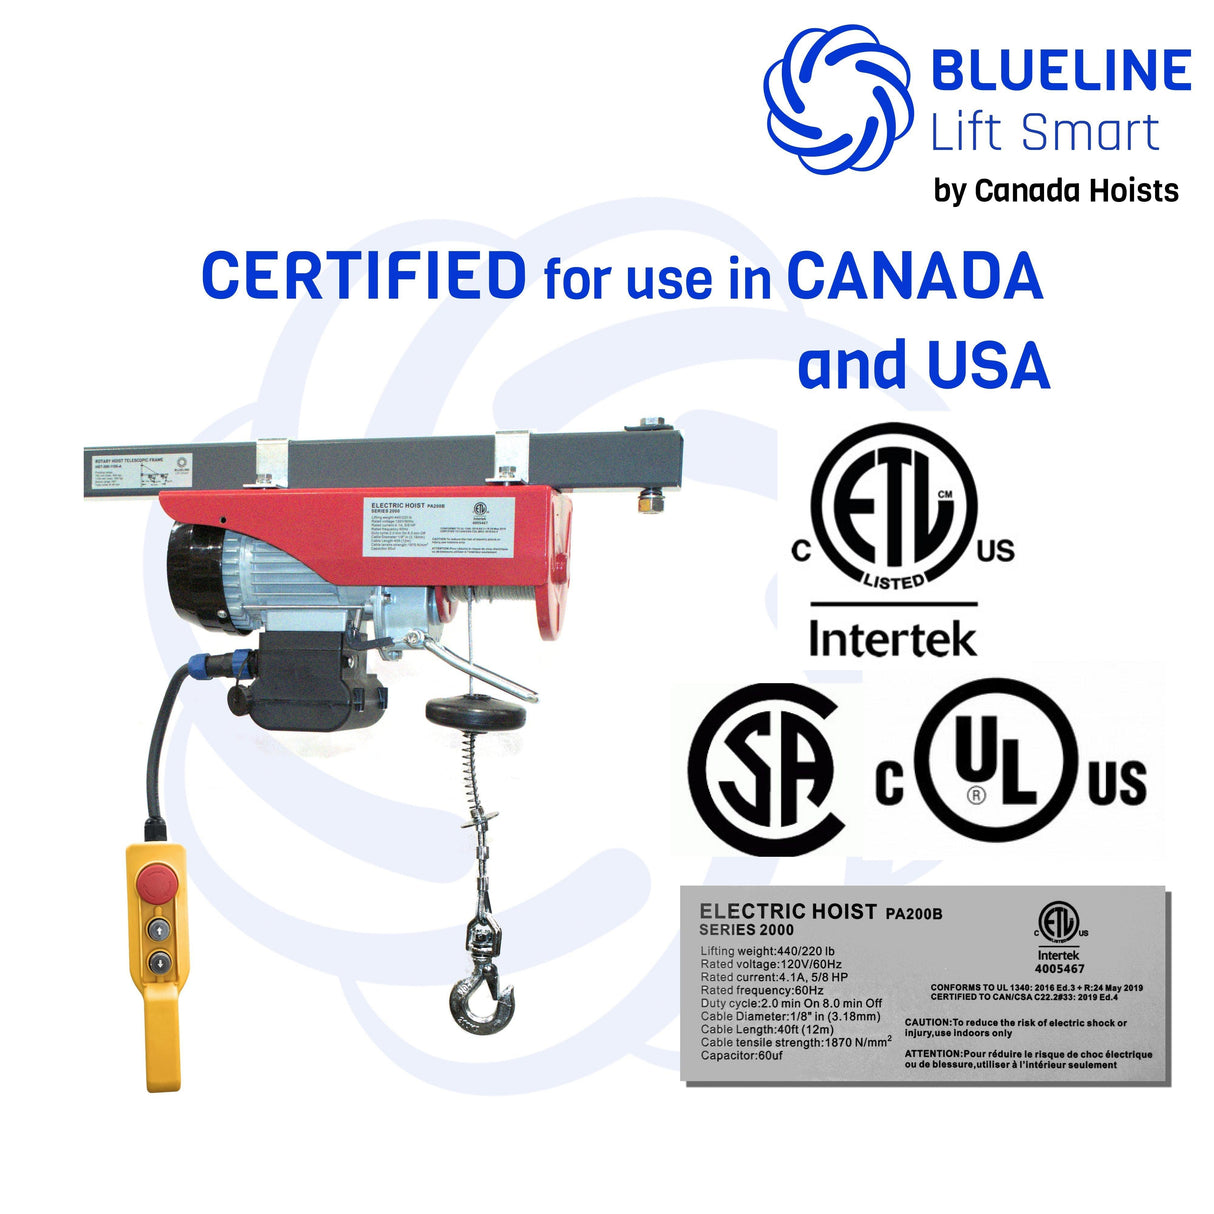 2200 lb (1000kg) BLUELINE Electric Hoist SERIES 2000 with 1 x 6FT + 1 x 20FT Wired Remote Controls + Multi-Control Box